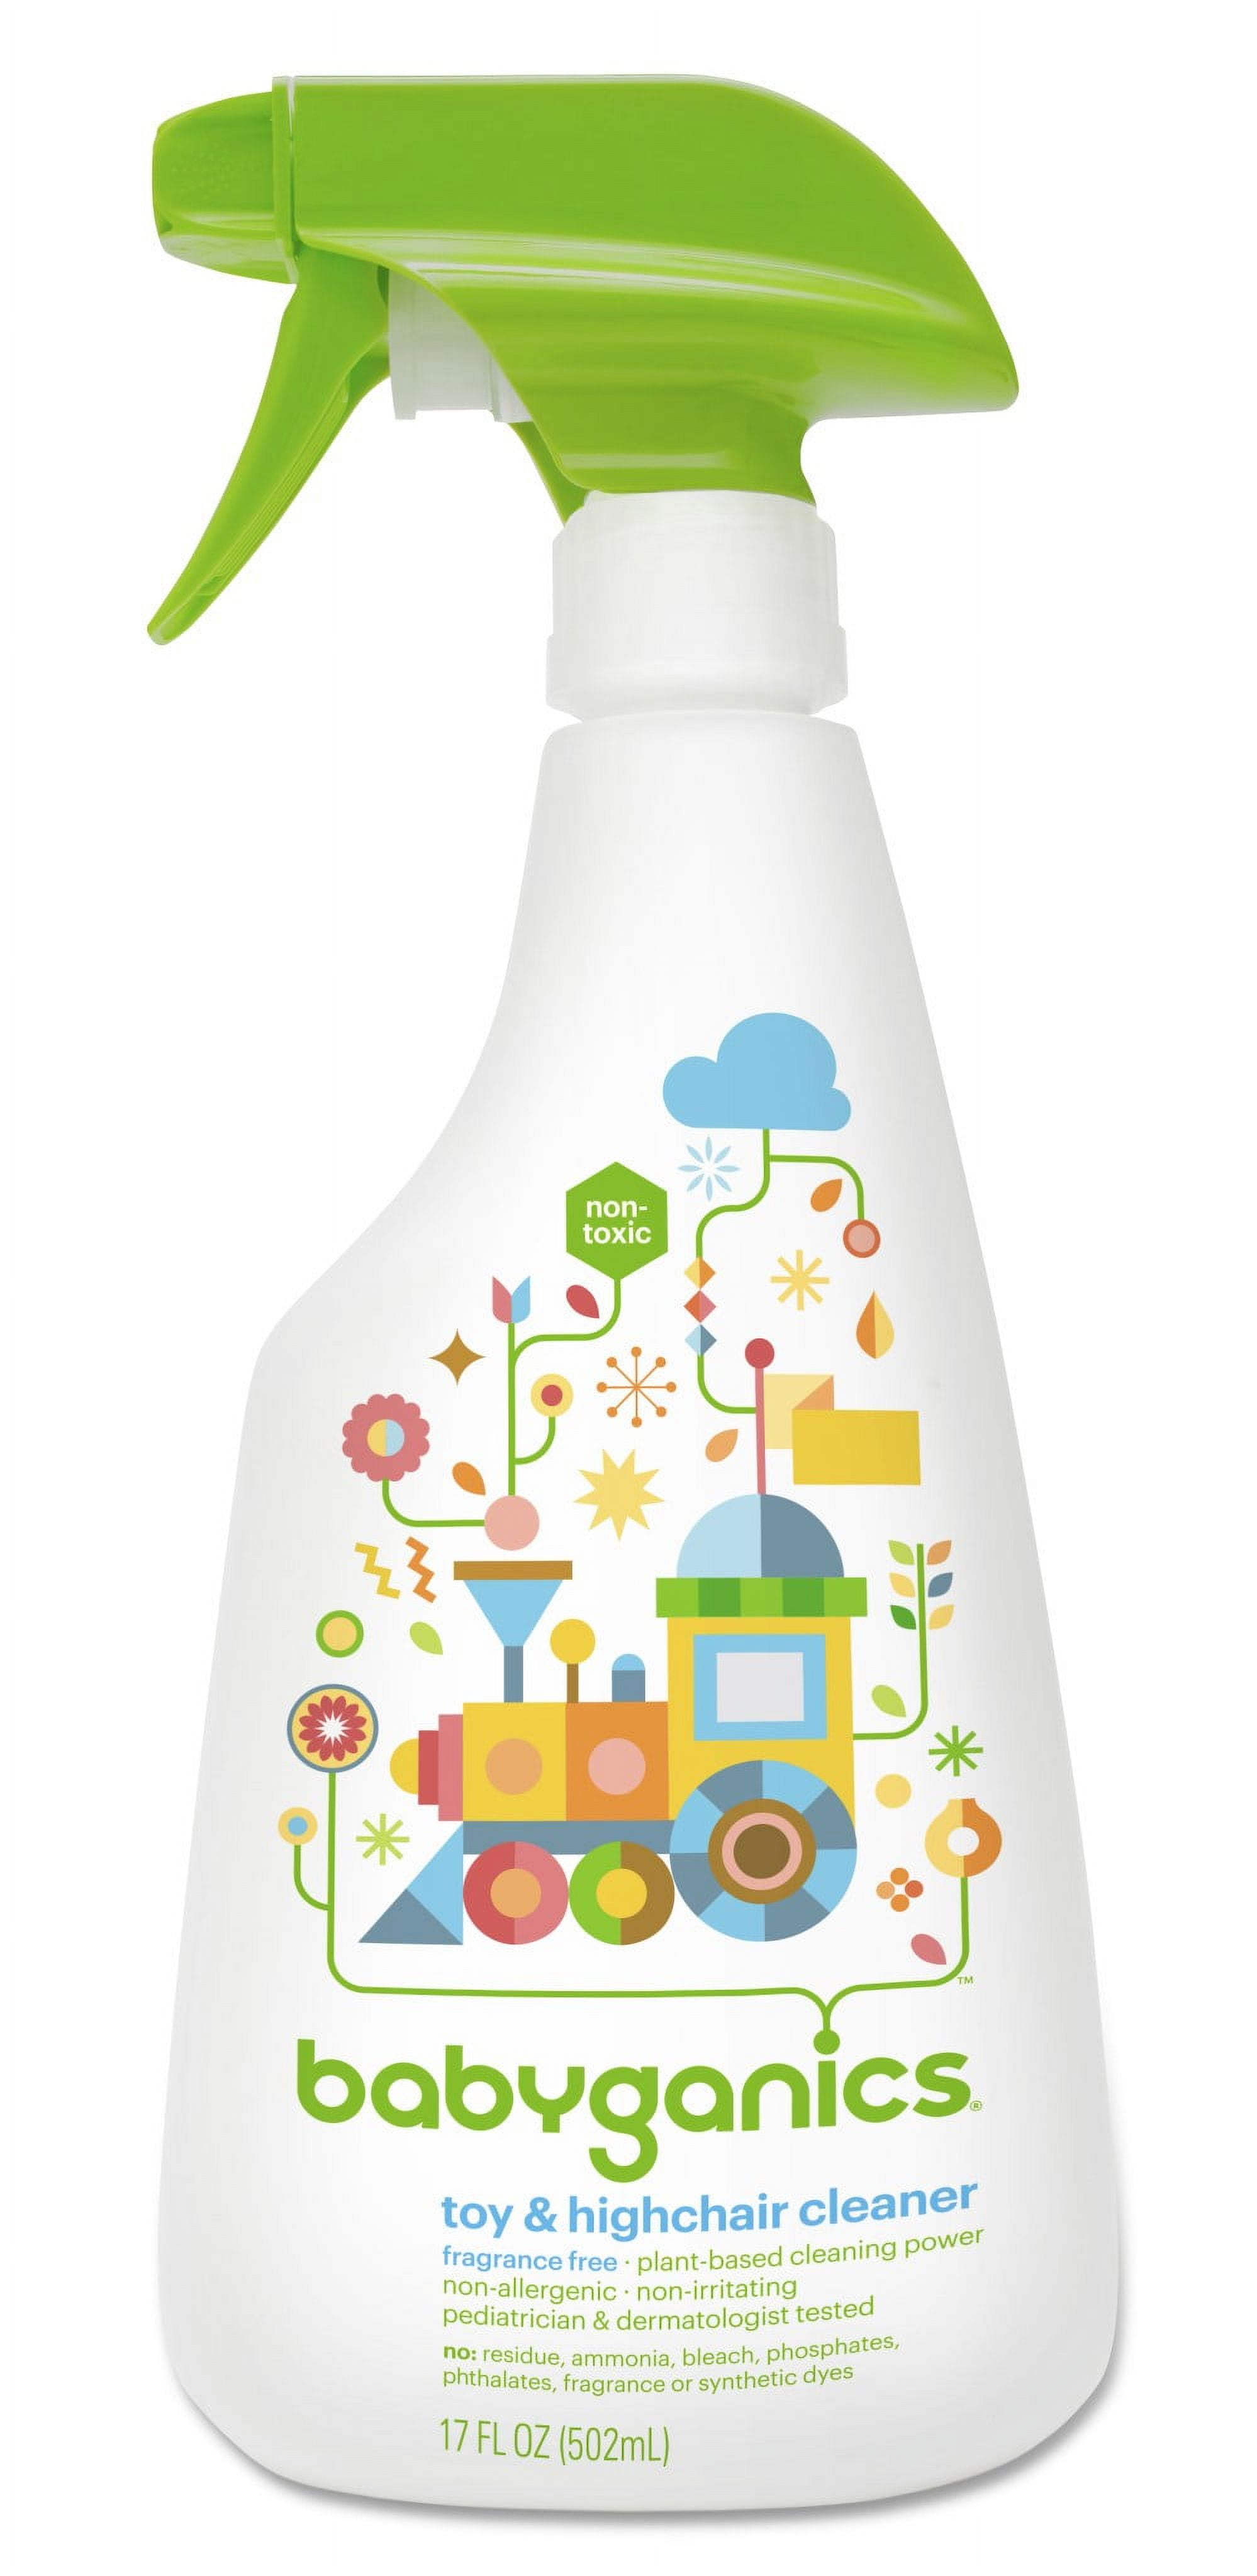 PUREFY Baby Everything CLEANER. Hypoallergenic. No Residue. Unscented. No Rinse. Baby Safe Cleaner for Toys, Pacifier, High Chair, and Nursery.